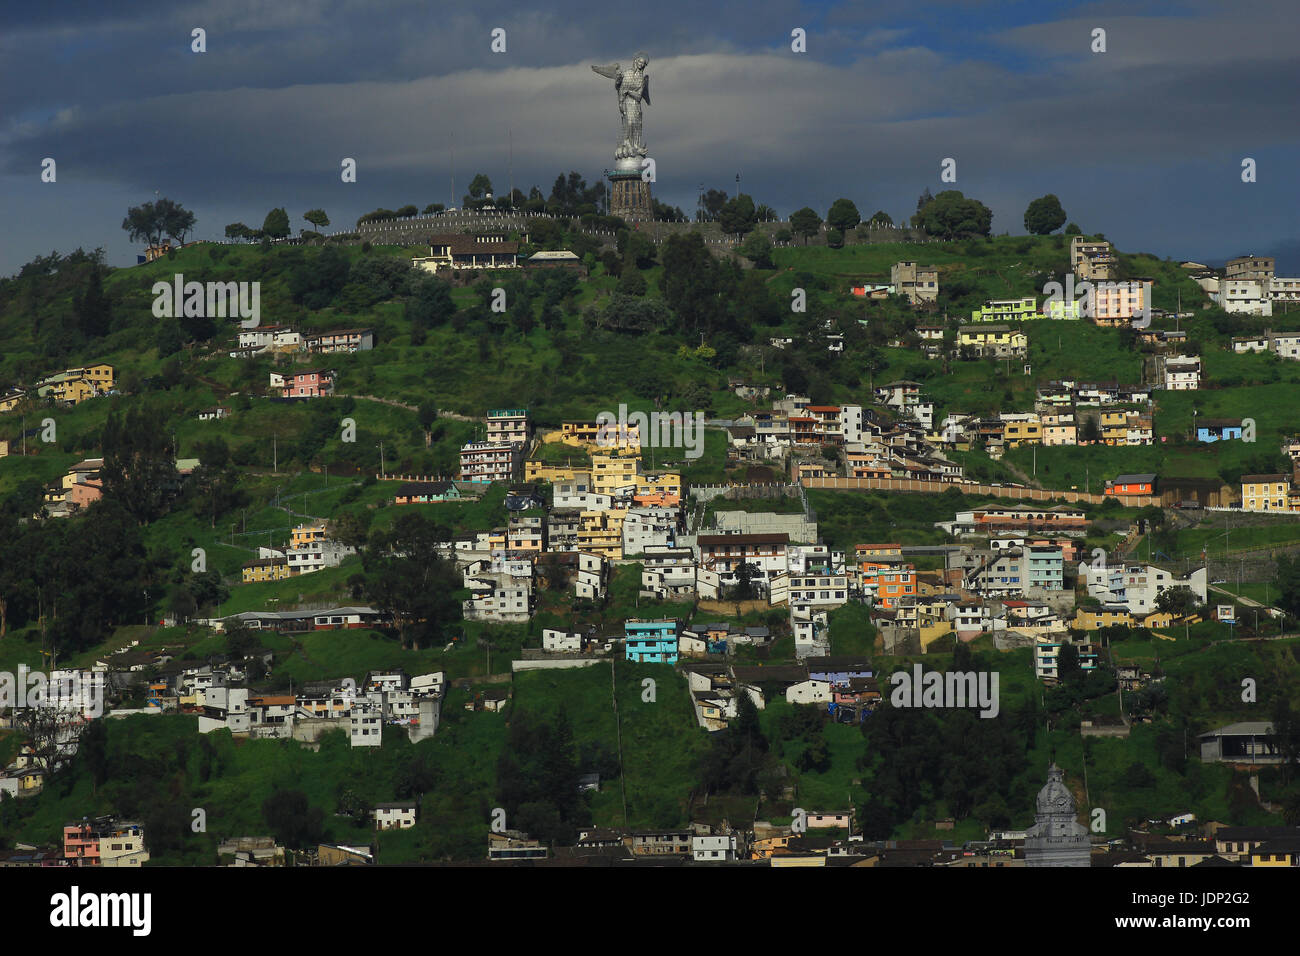 A statue of the Winged Virgin Mary on a hill in the historic center of Quito, Ecuador Stock Photo